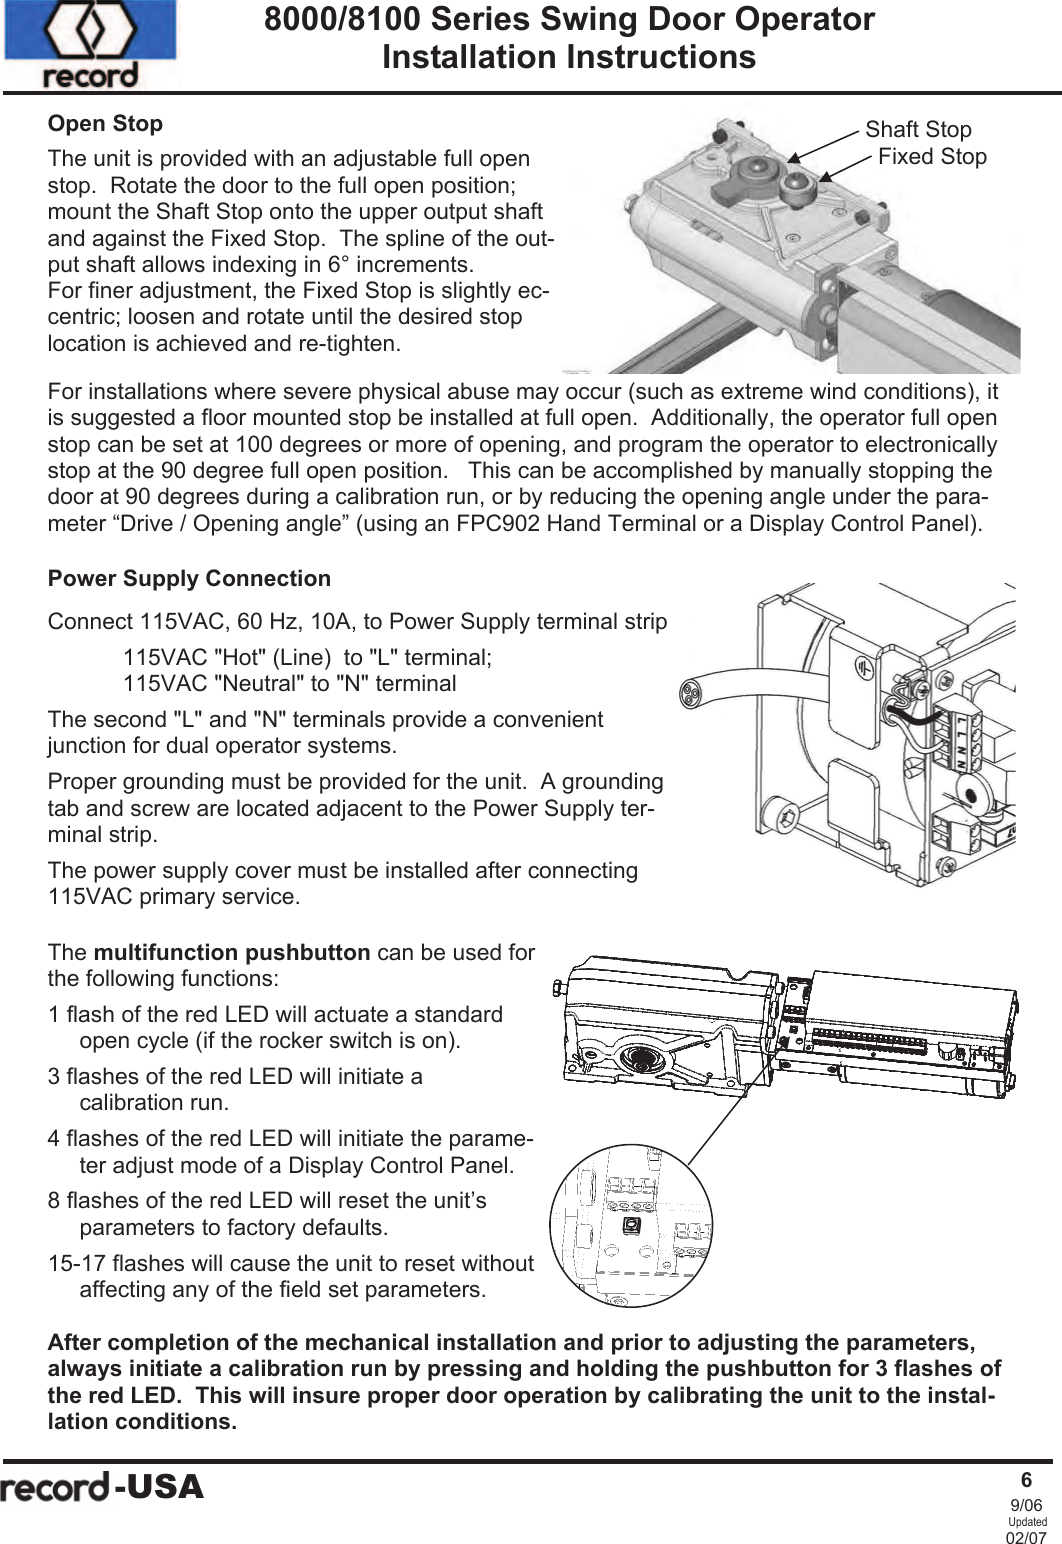 Page 1 of 1 - Record-usa A-S8000InstallationSep11 8100 Series Swing Door Operator Installation Instructions 2523